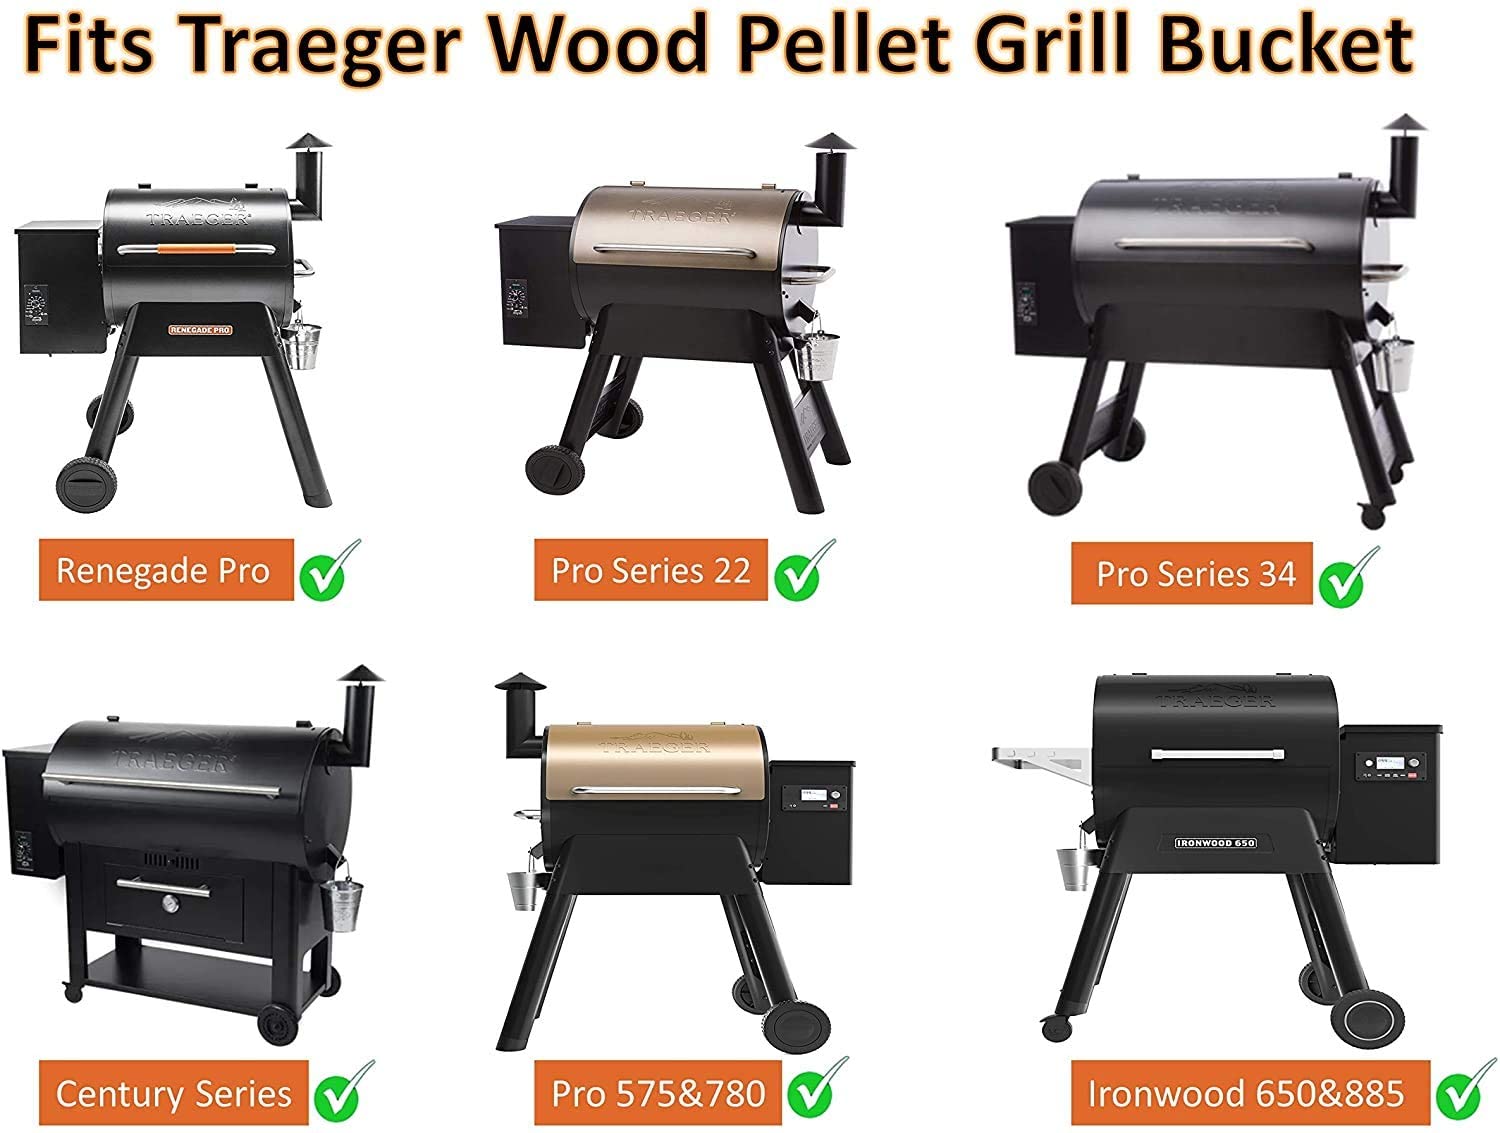 Grill Grease Bucket Liners Replacement Parts for Traeger Wood Pellet Grill & Smoker (50liners)